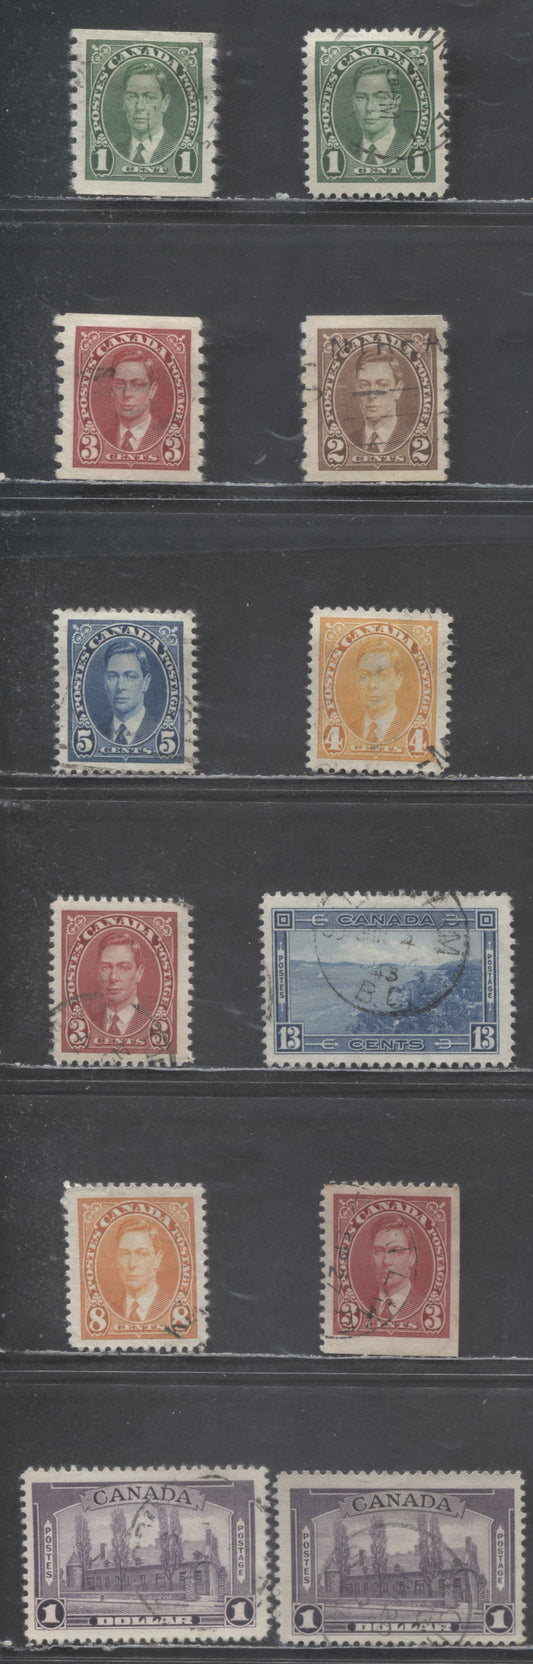 Lot 402 Canada #231, 233-236, 233as, 242, 245-245i 1c, 3c-8c, 13c, $1 Green - Dull Violet King George VI & Various Scenes, 1937-1942 Mufti Issue, 12 Fine & VF Used Singles, Nice Light Cancels